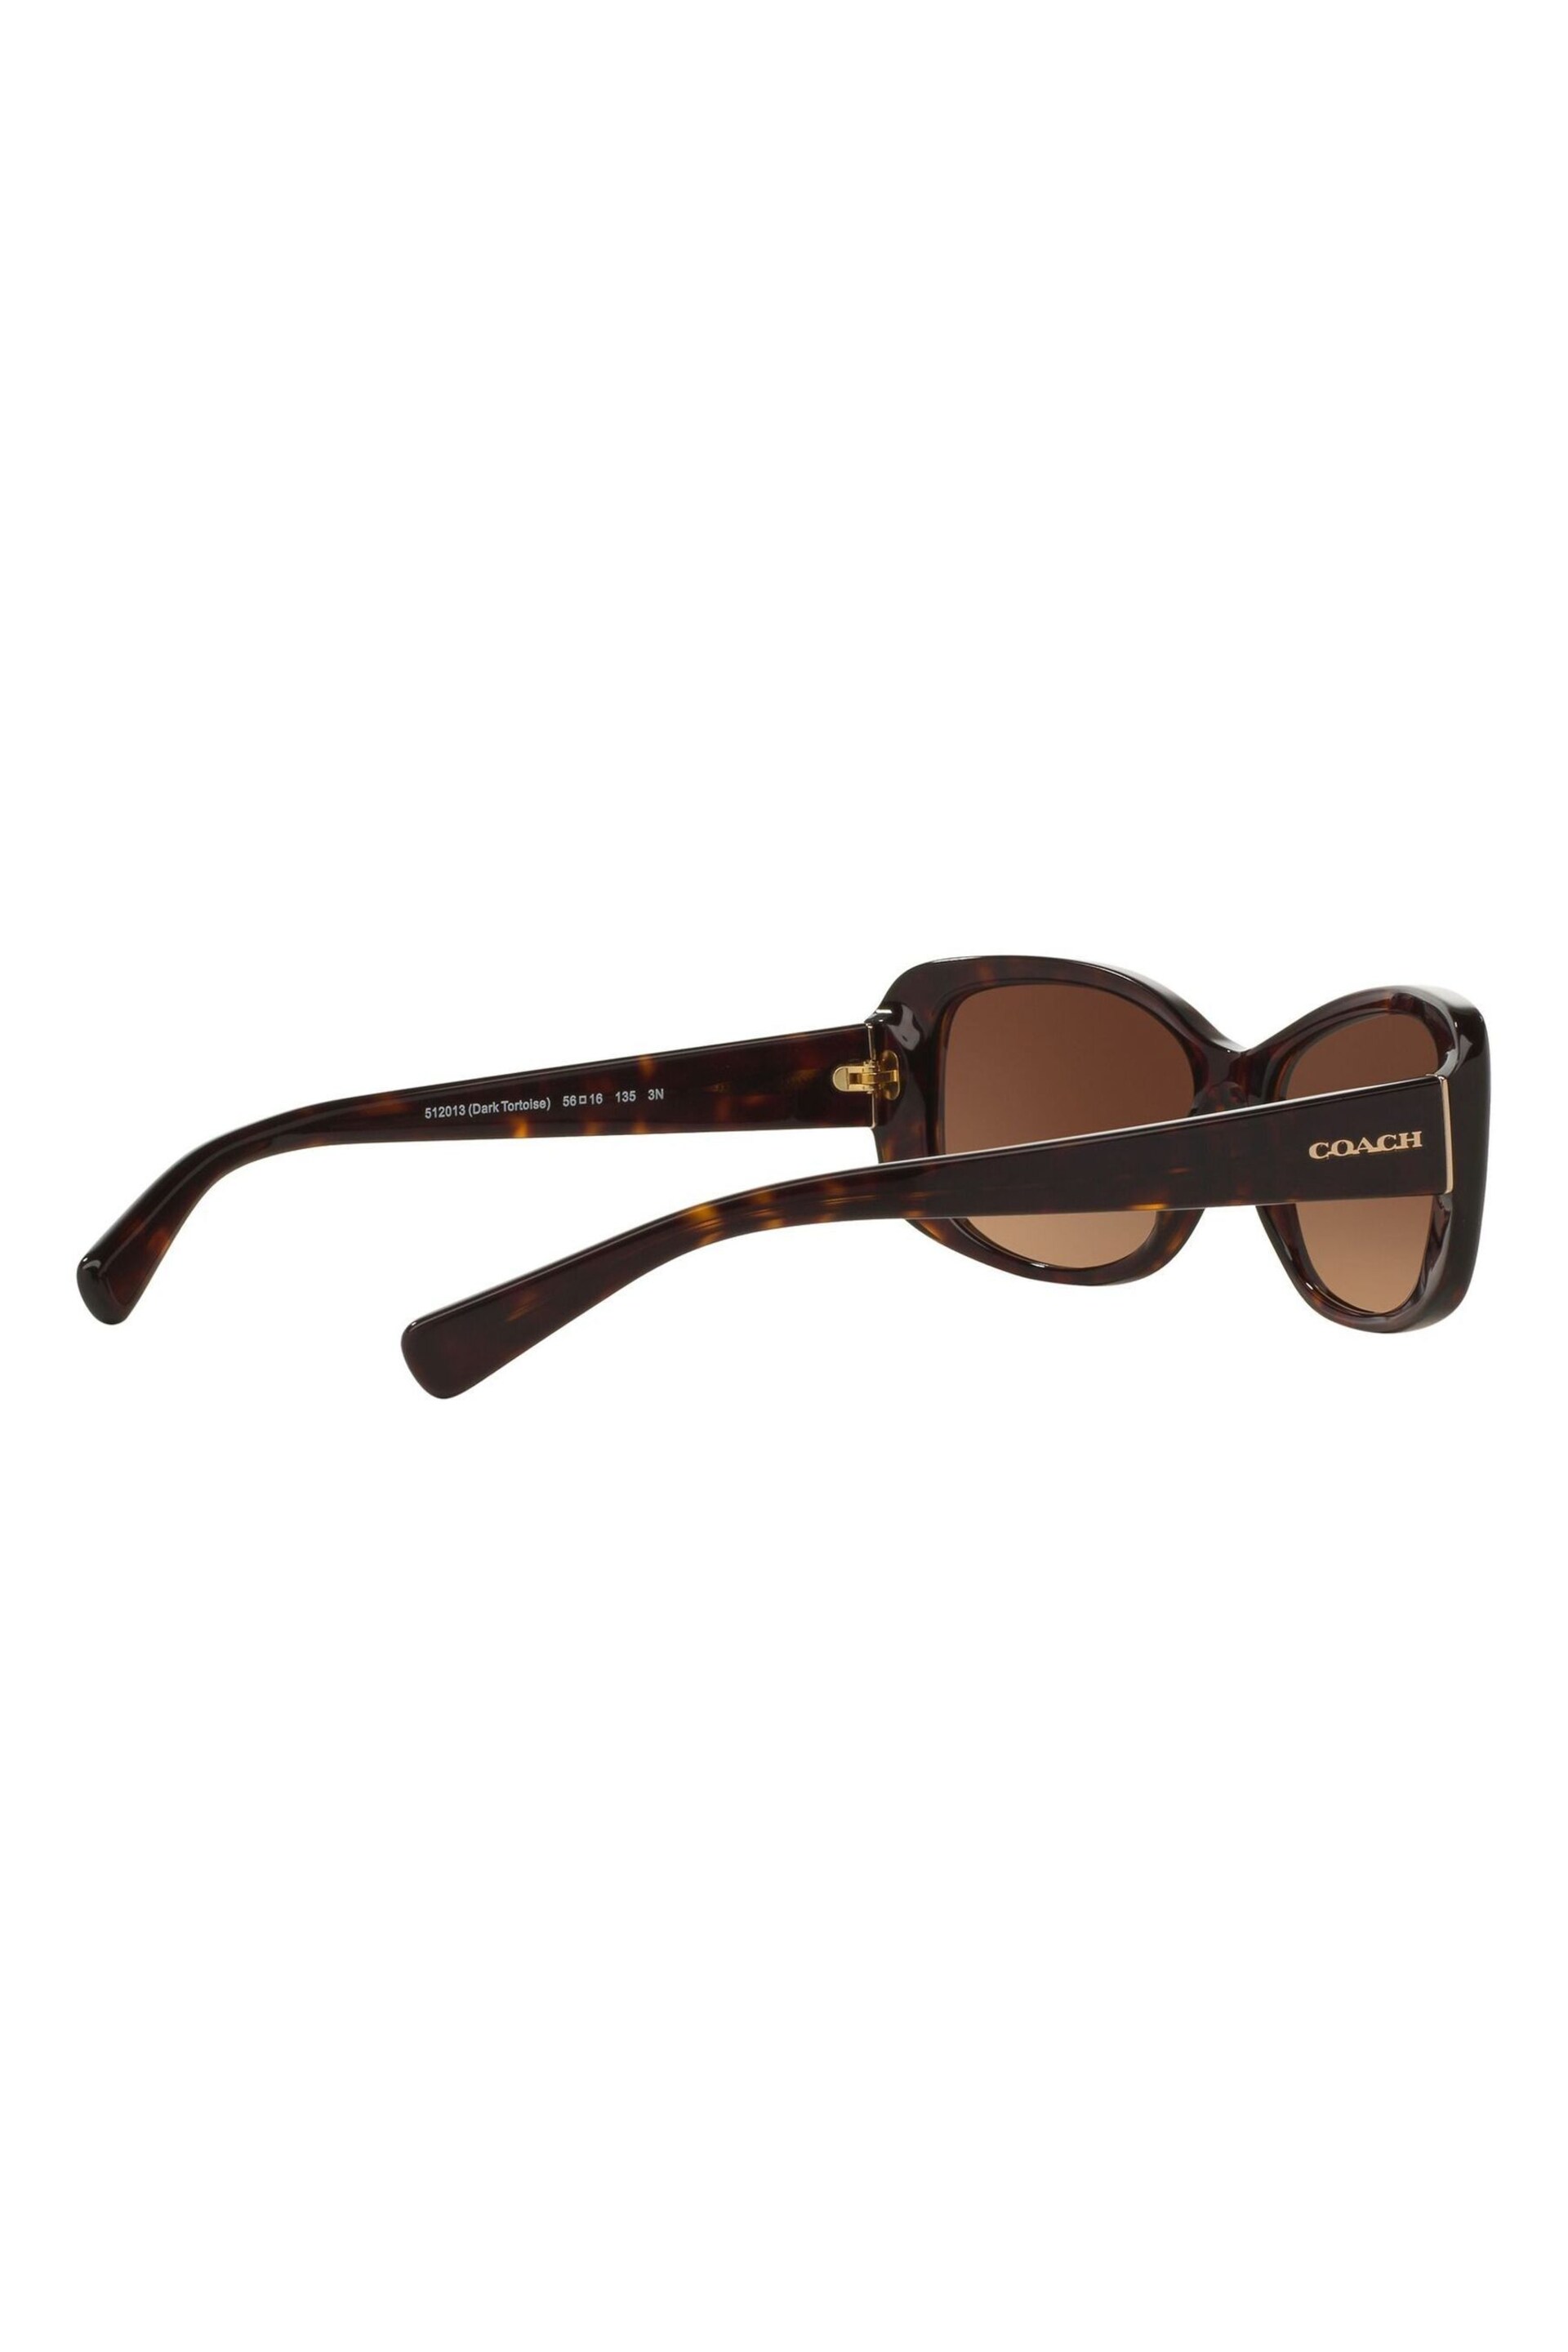 Coach Brown L156 Oval Sunglasses - Image 12 of 13